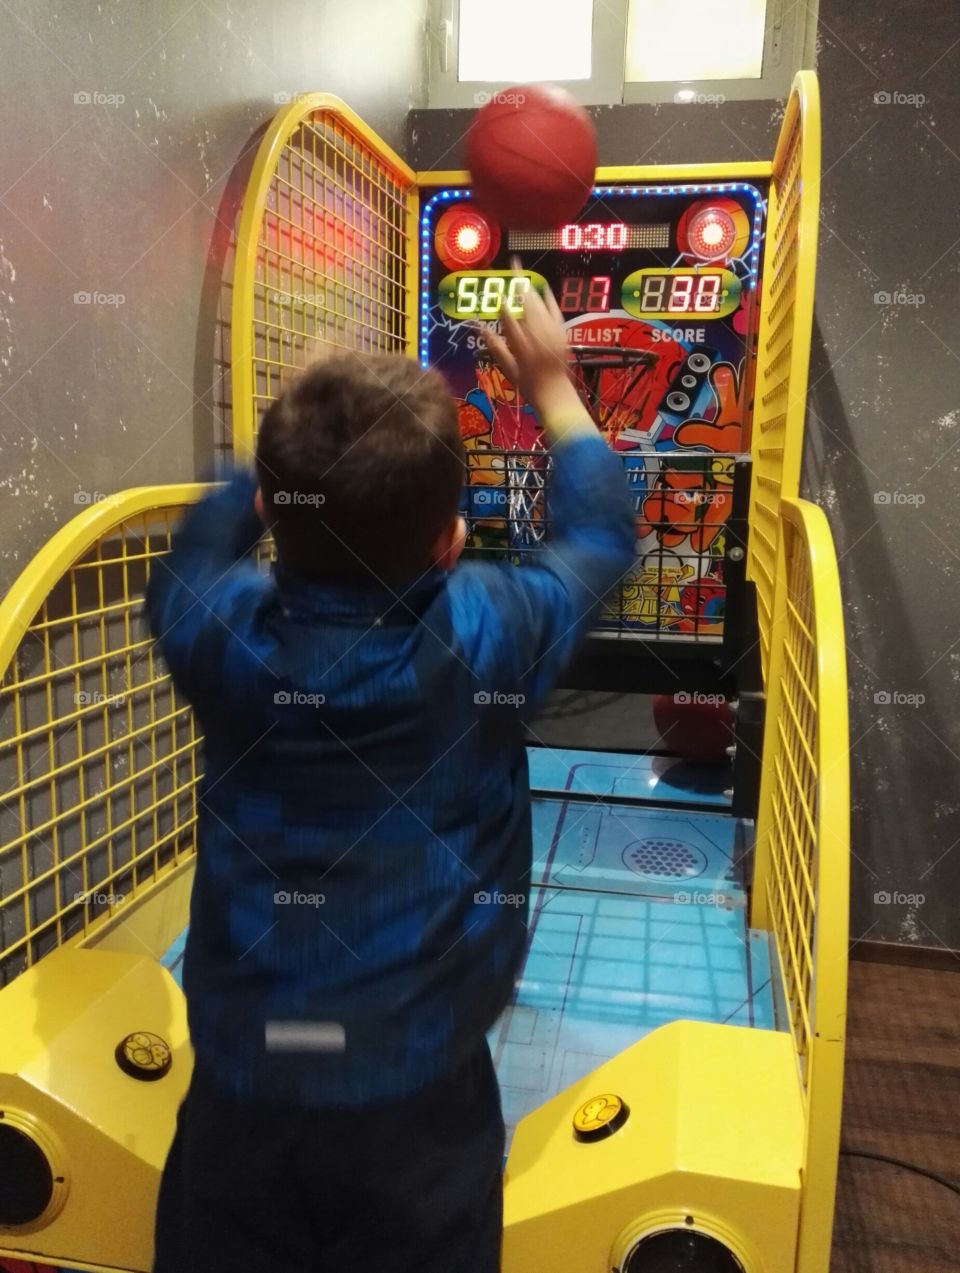 child playing payed basketball game machine, colourful